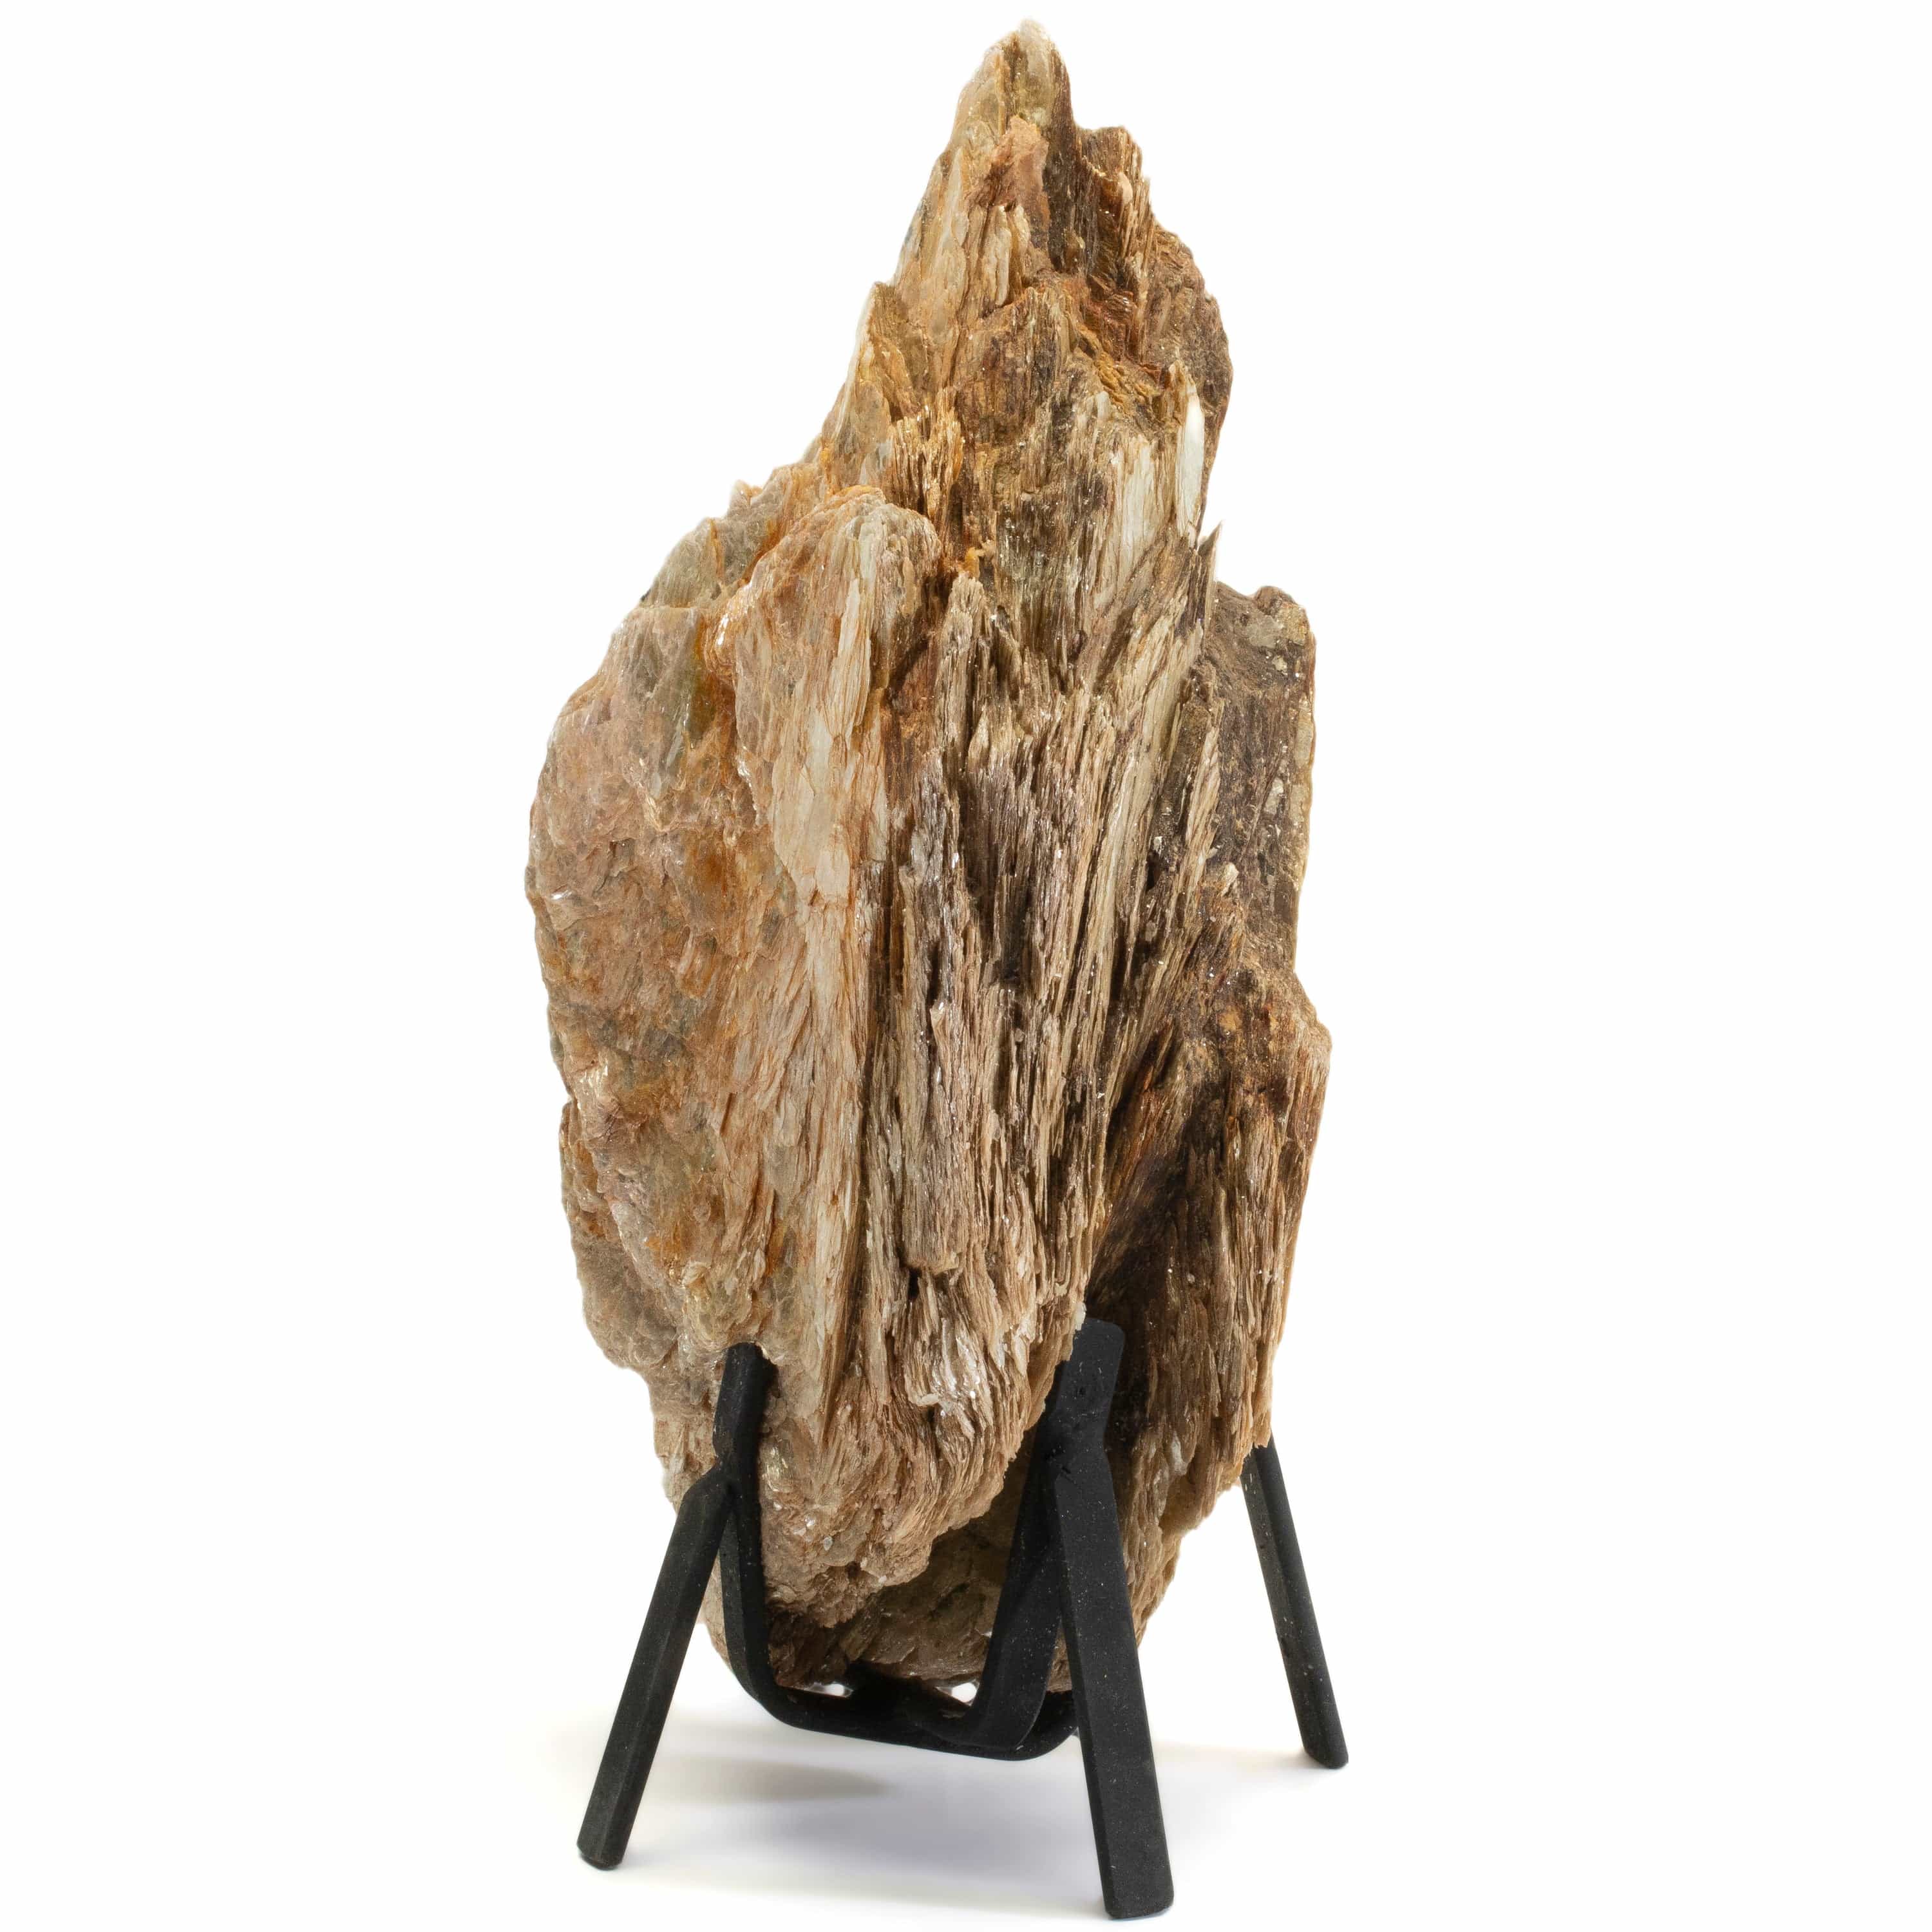 Kalifano Mica Natural Mica on Custom Stand from Brazil - 14" / 17 lbs MC3800.002